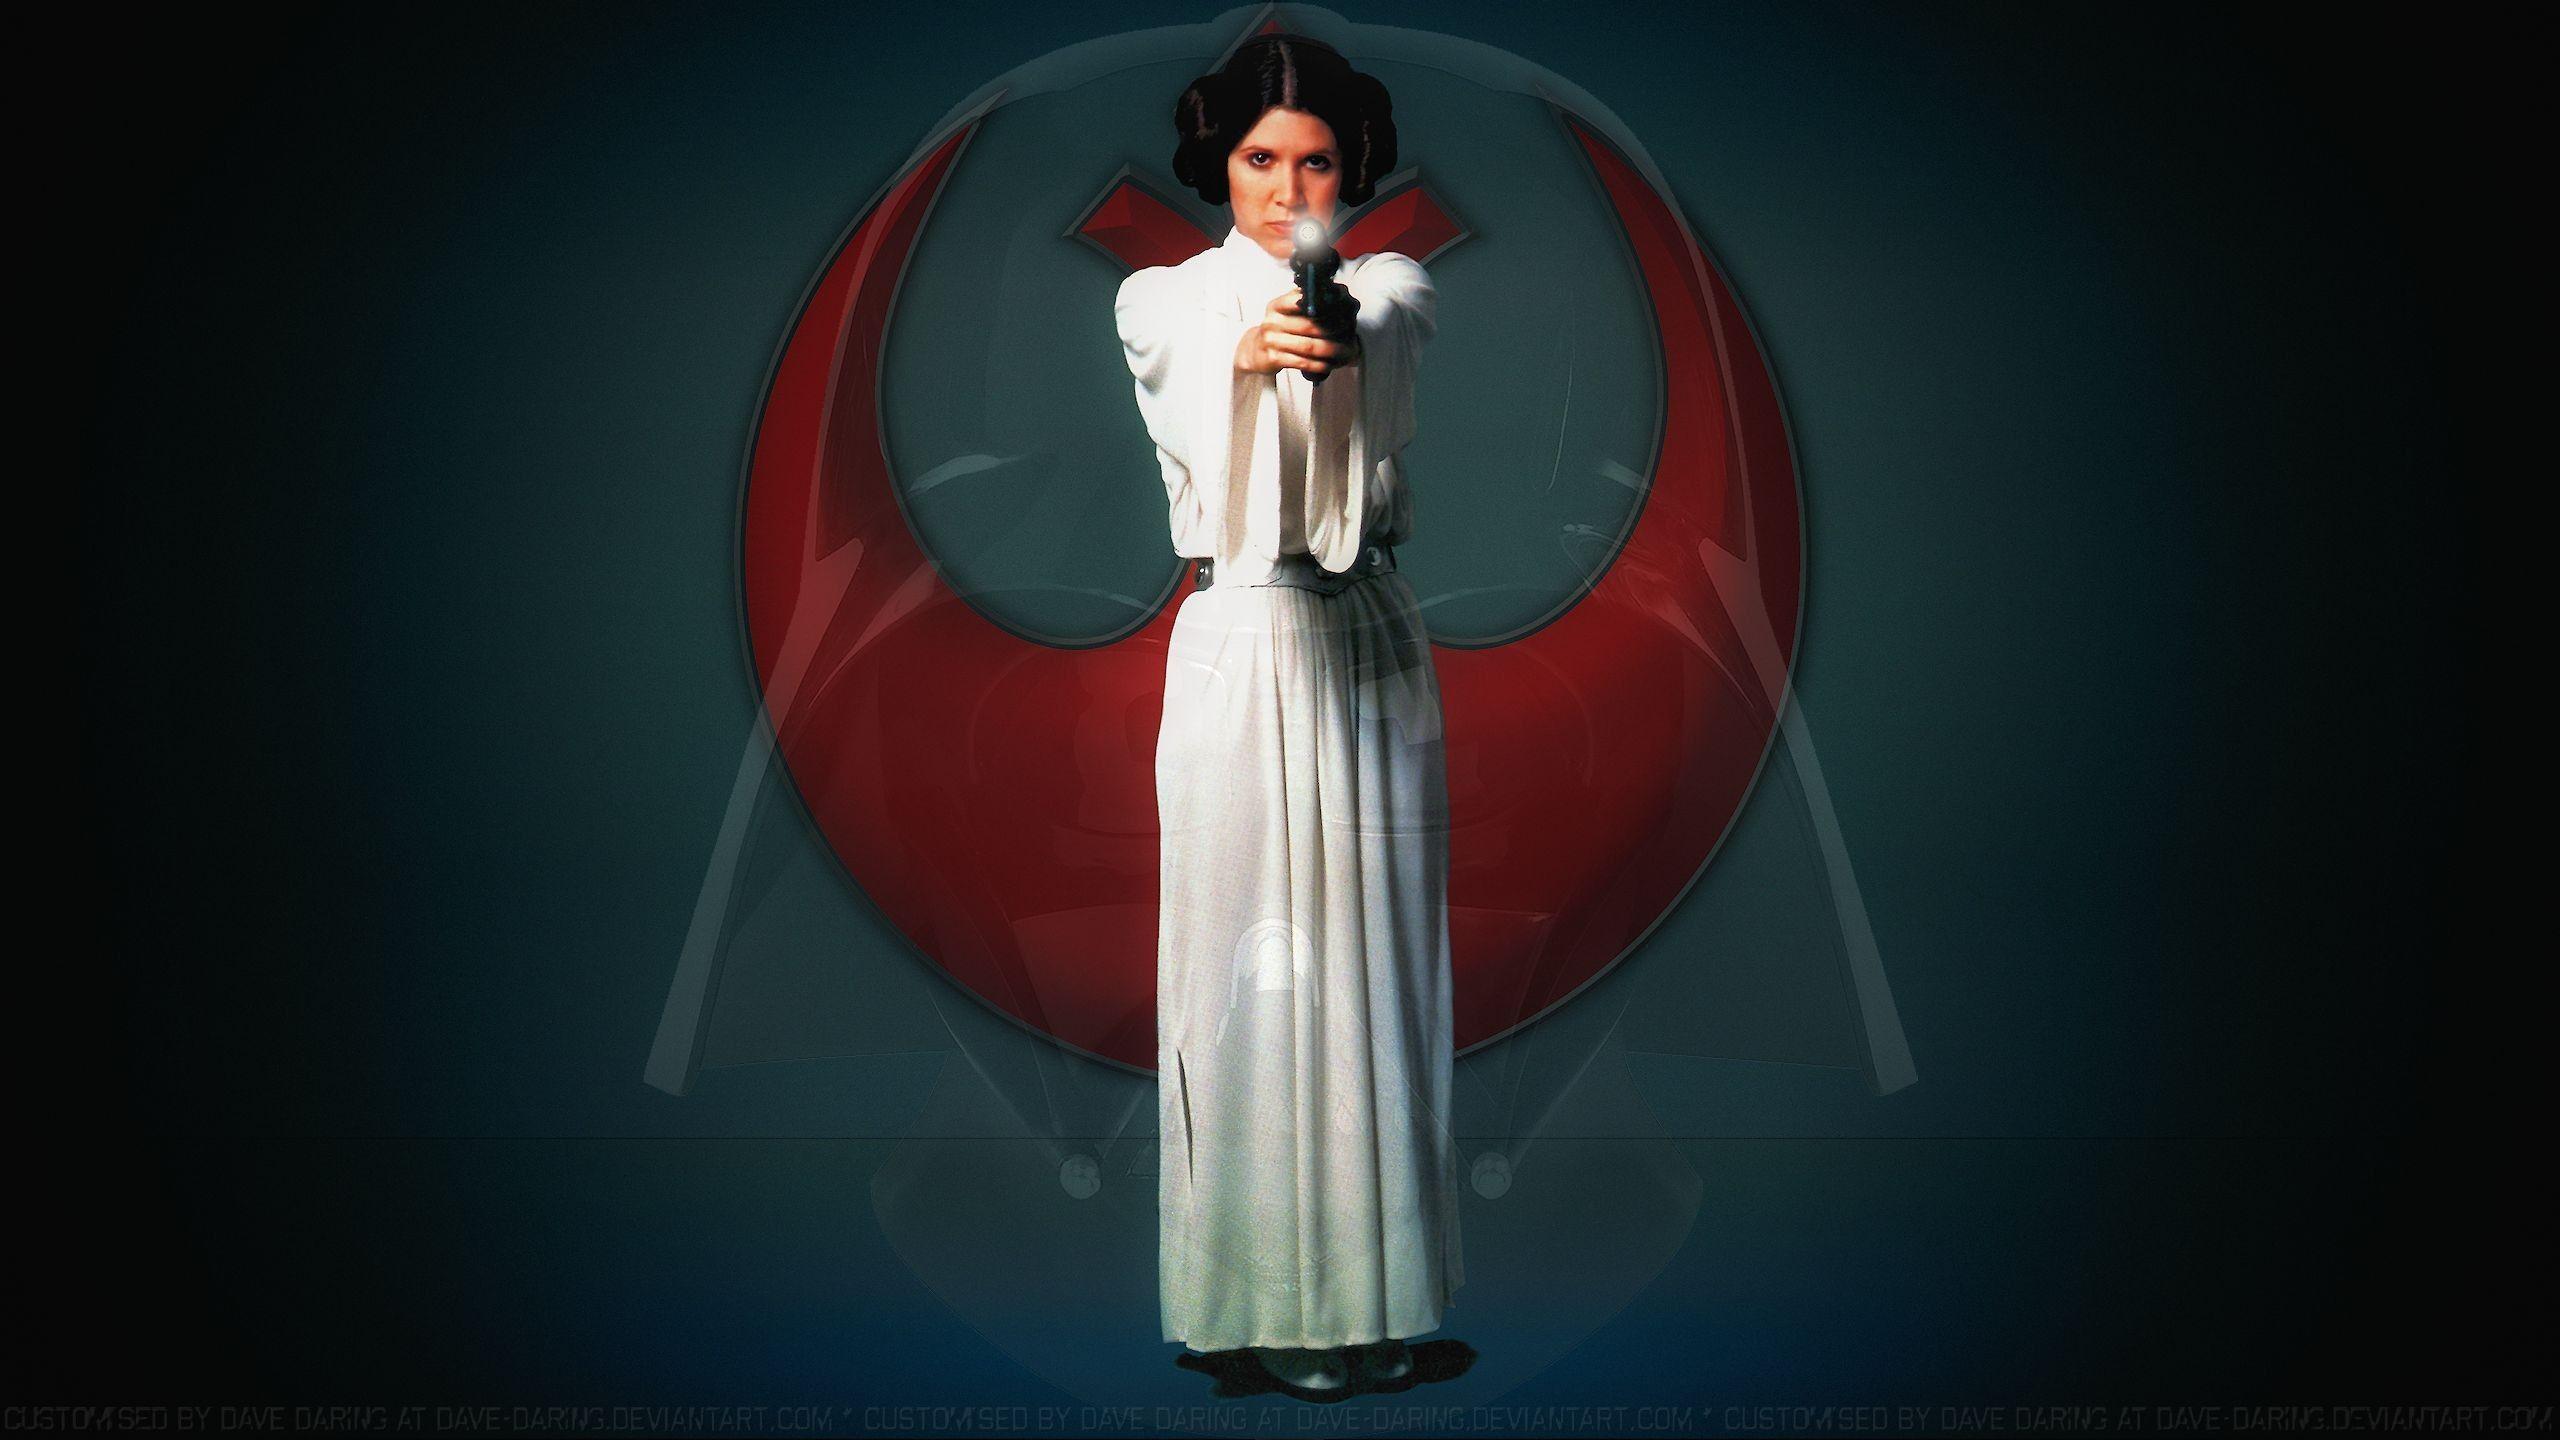 Princess Leia wallpapers HD  Download Free backgrounds